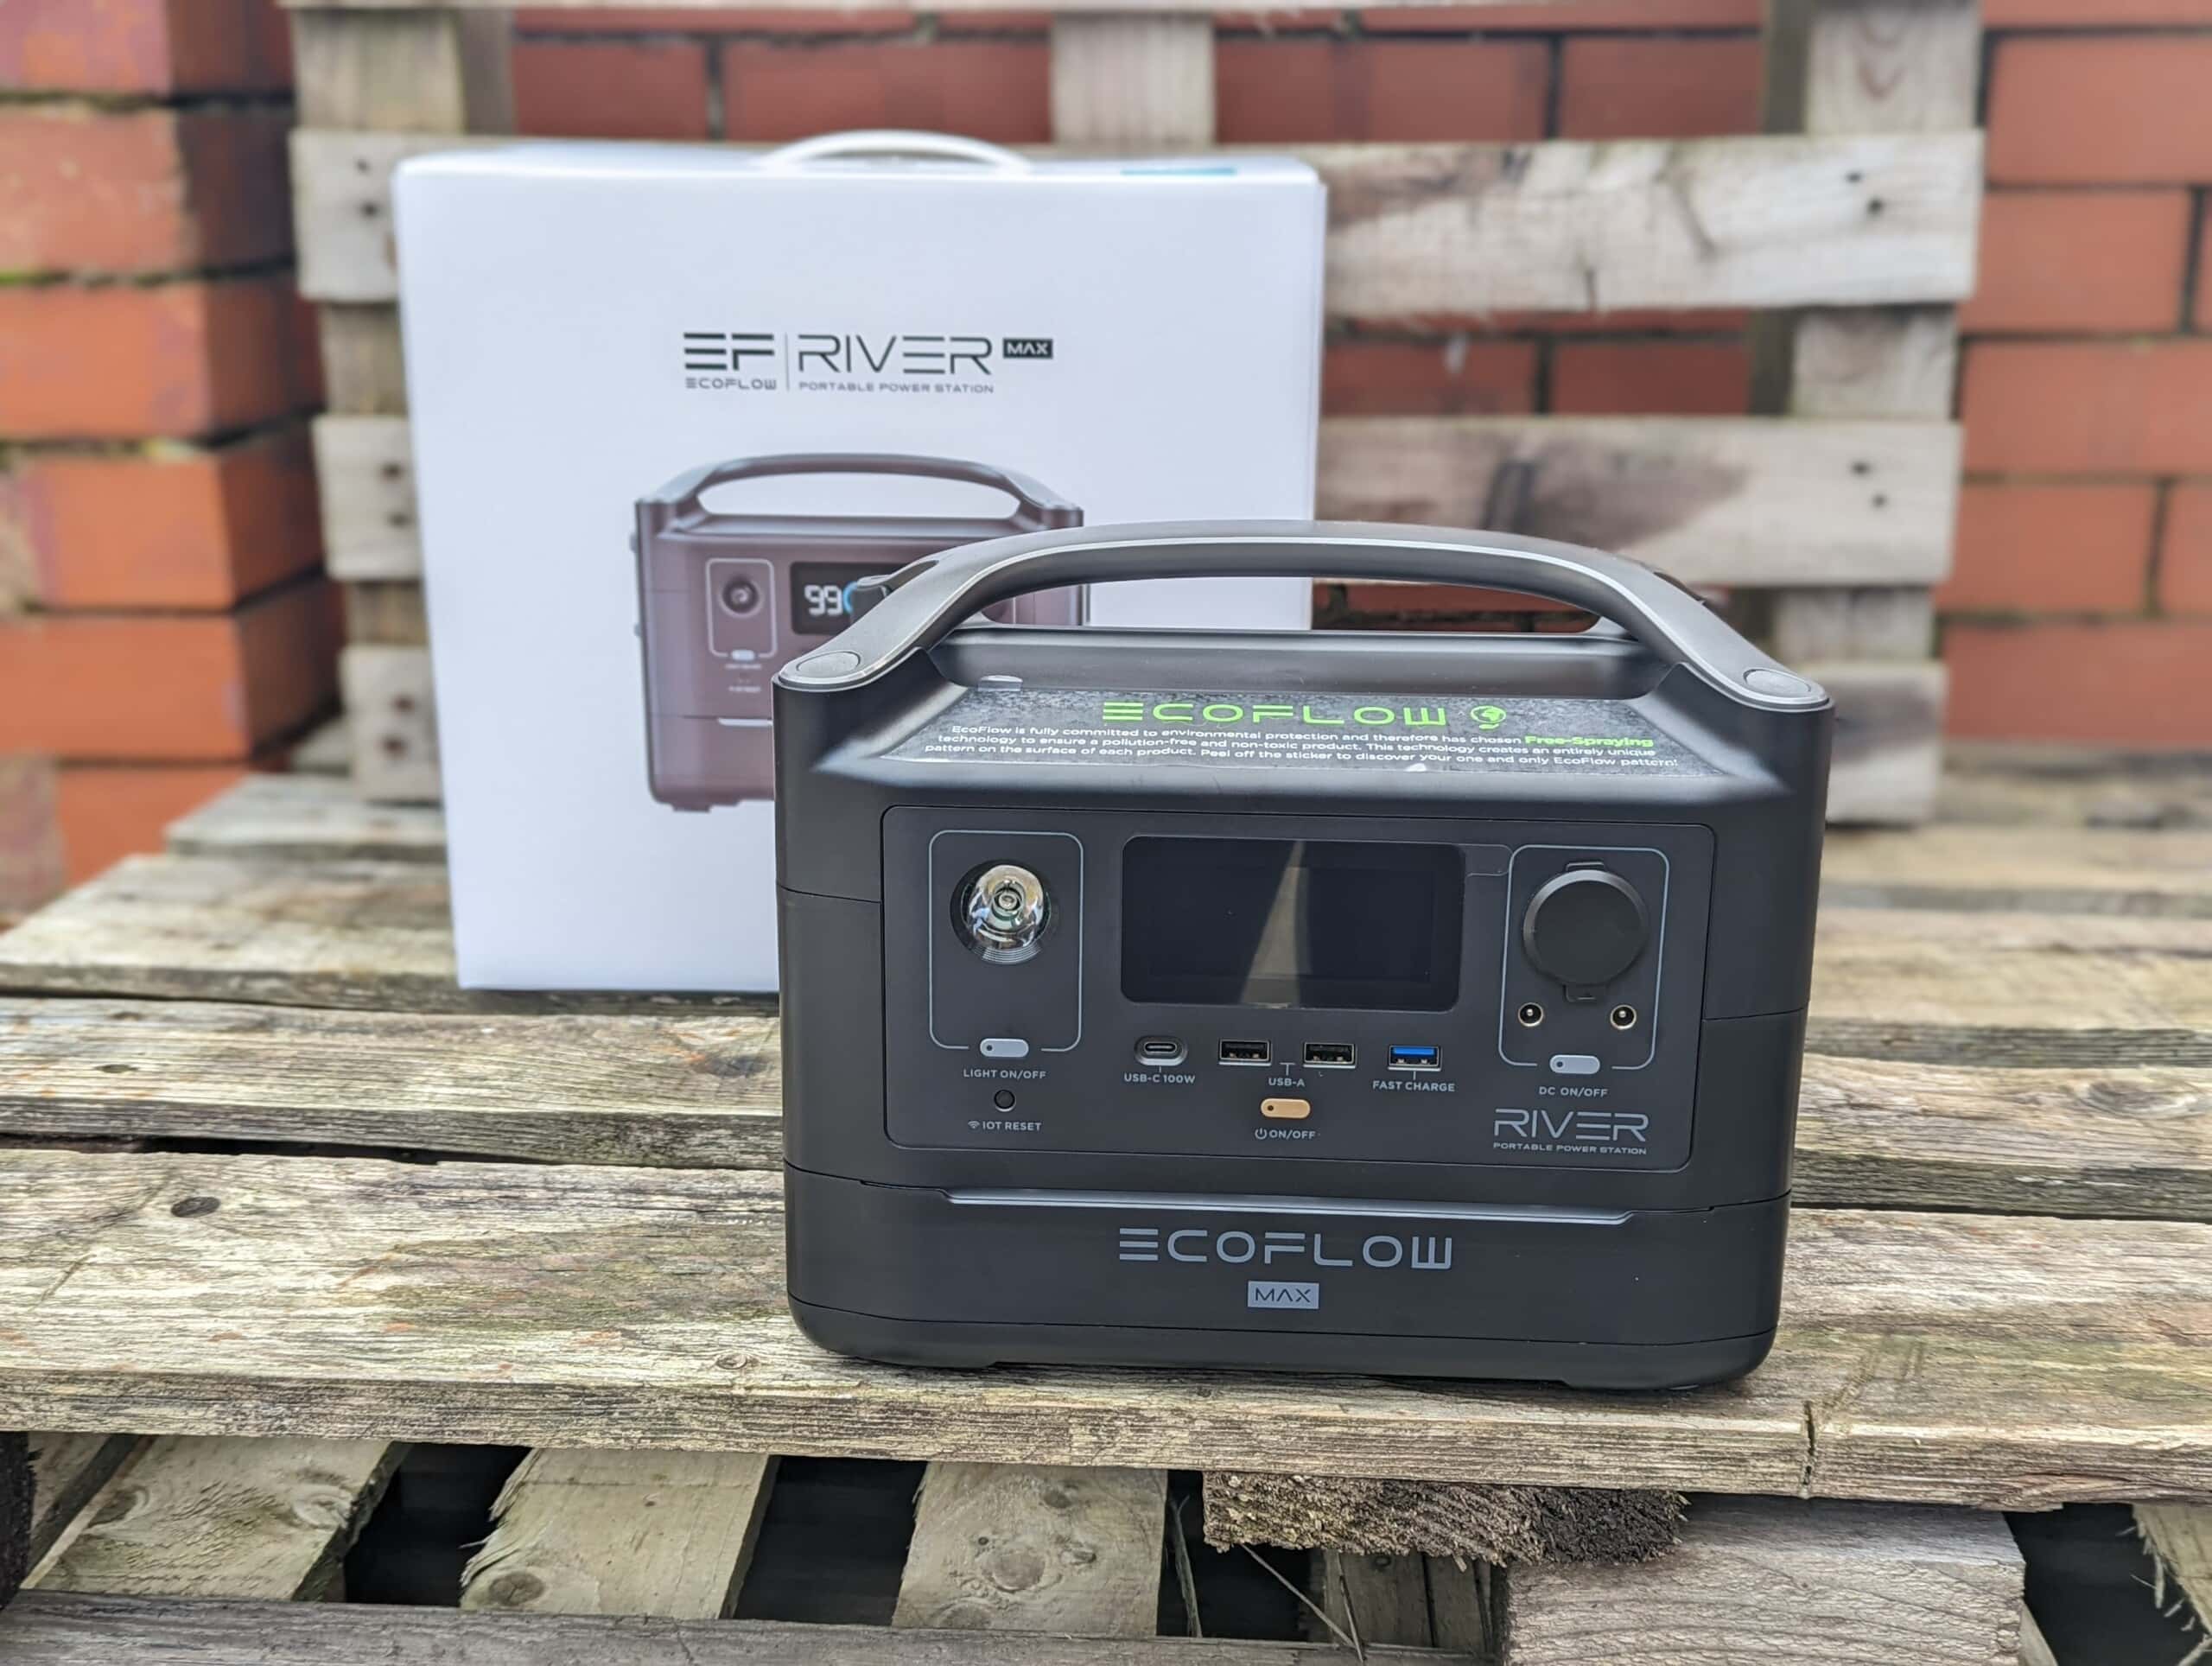 EcoFlow River Max 600Wh Portable Power Station Review – Better outputs than Jackery, including 100W USB-C power delivery